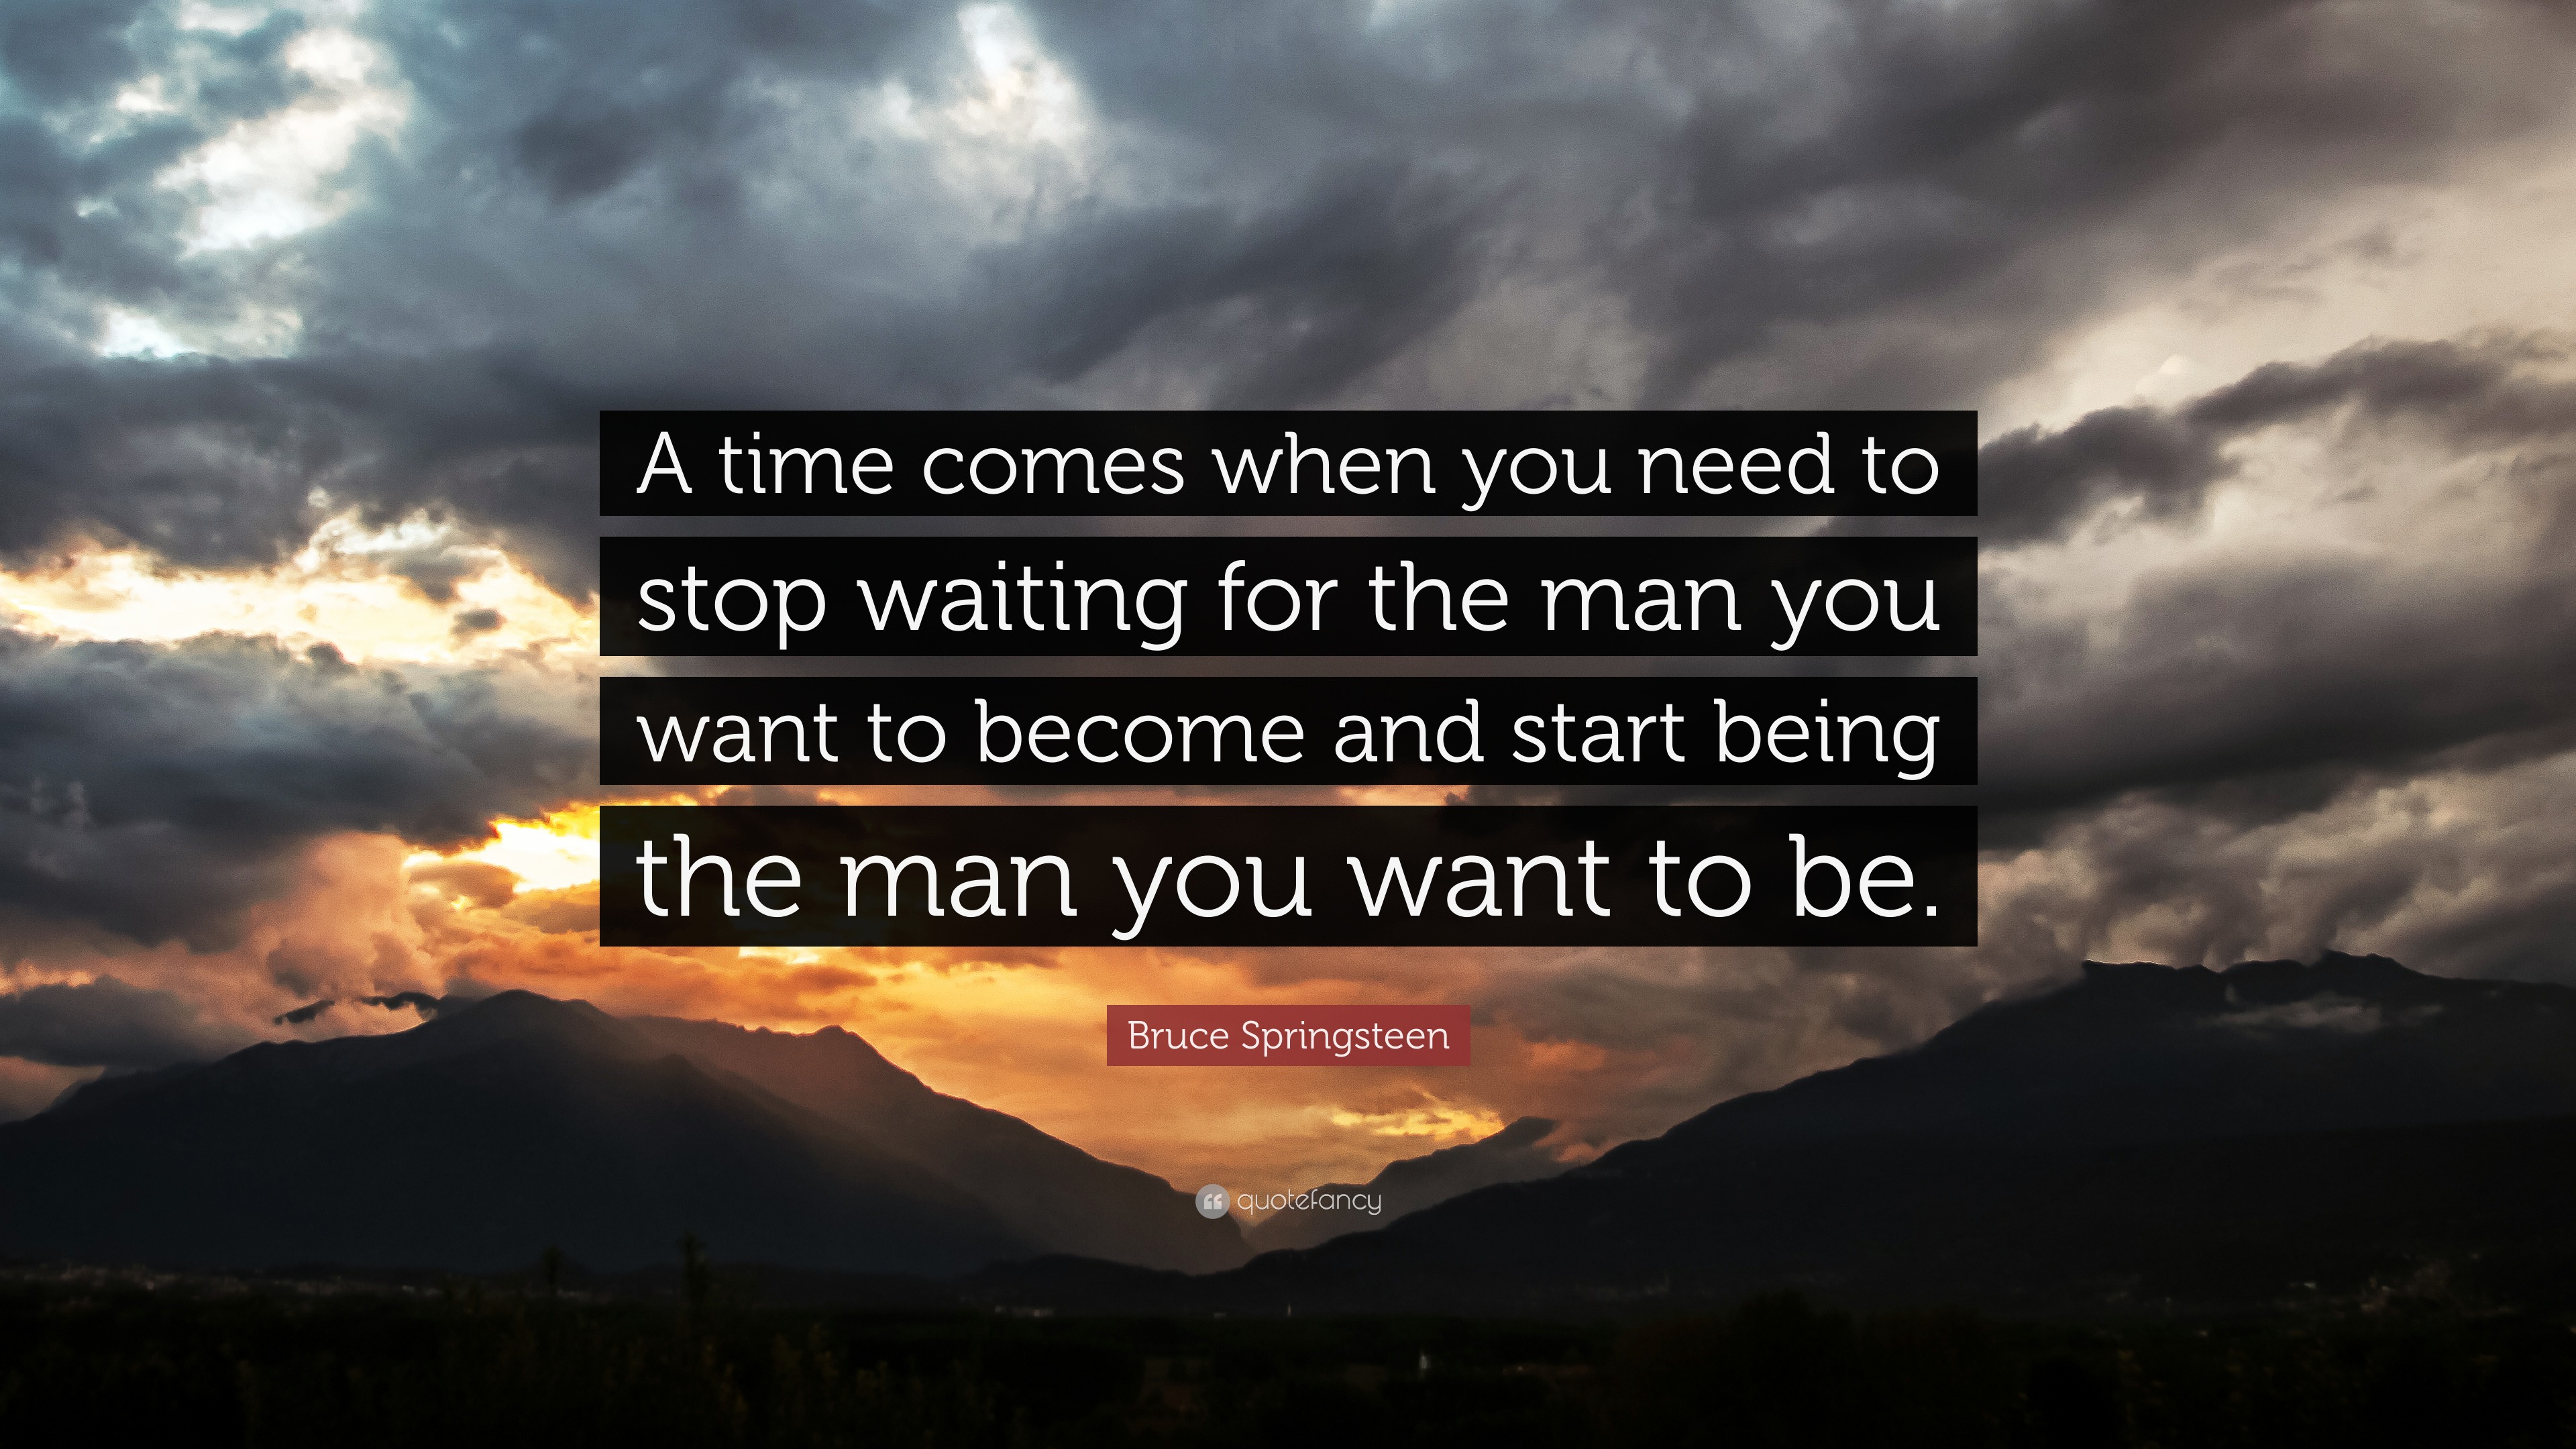 Bruce Springsteen Quote: “A time comes when you need to stop waiting ...